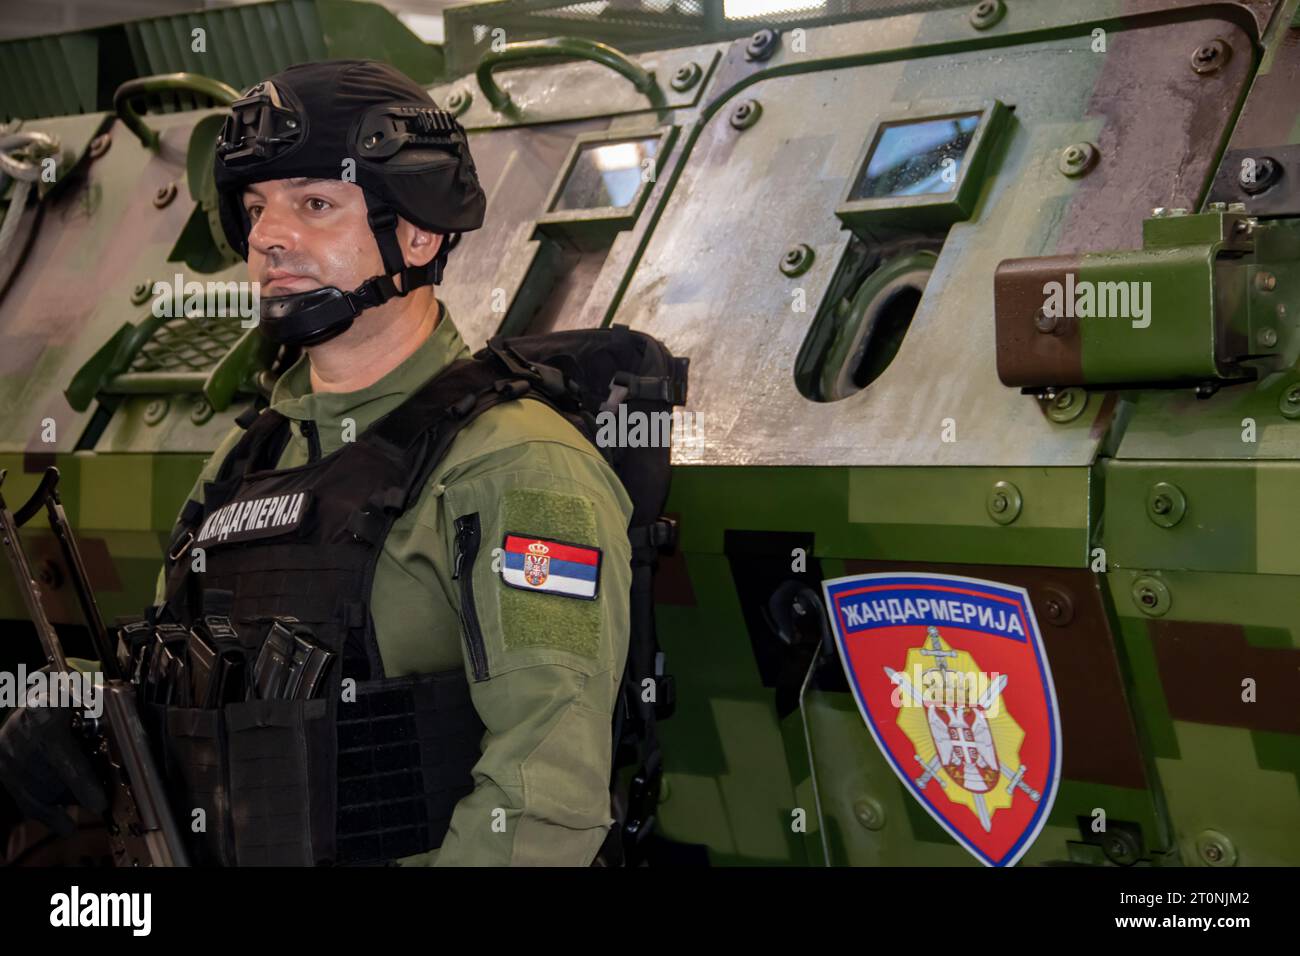 Member of special Serbian forces anti-terrorist soldier under full military equipment with automatic riffle and bullet proof west and helmet Stock Photo